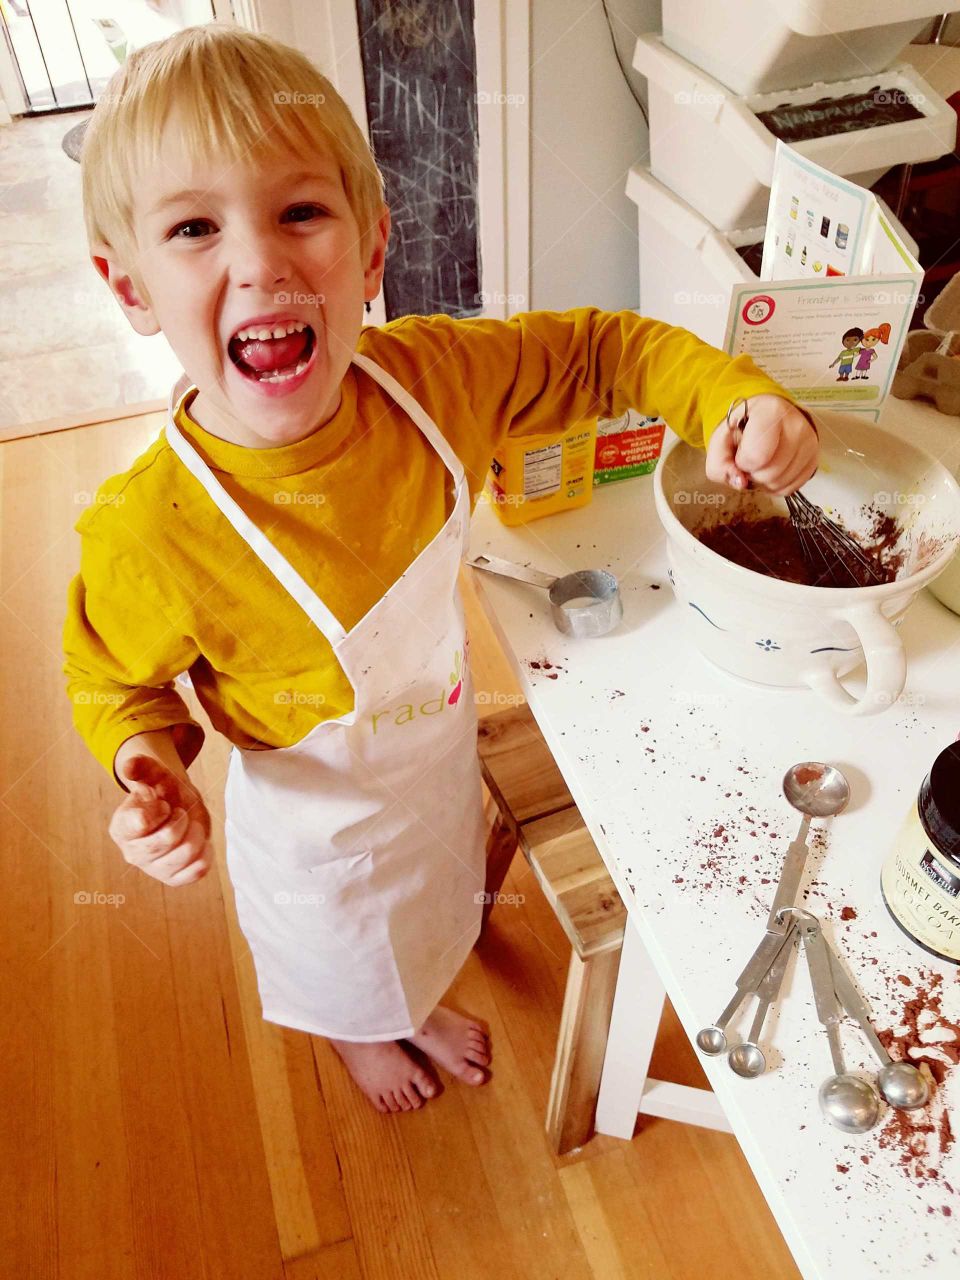 boy having fun making chocolate pudding from scratch